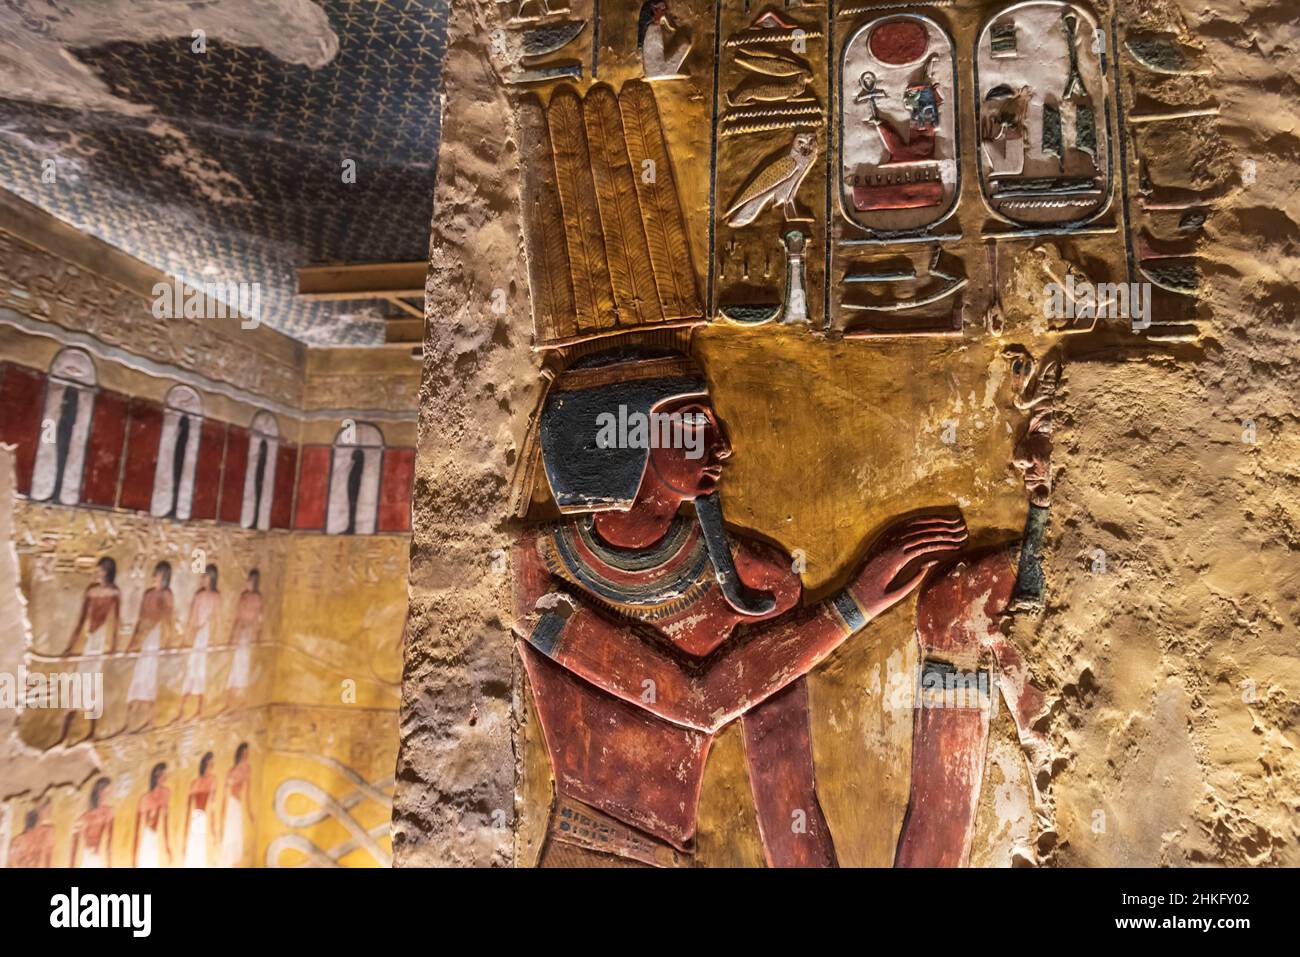 Egypt, Upper Egypt, Nile Valley, Luxor, Valley of the Kings, listed as World Heritage Site by UNESCO, colourful bas relief depicting Pharaoh on a wall of the tomb of Seti I Stock Photo